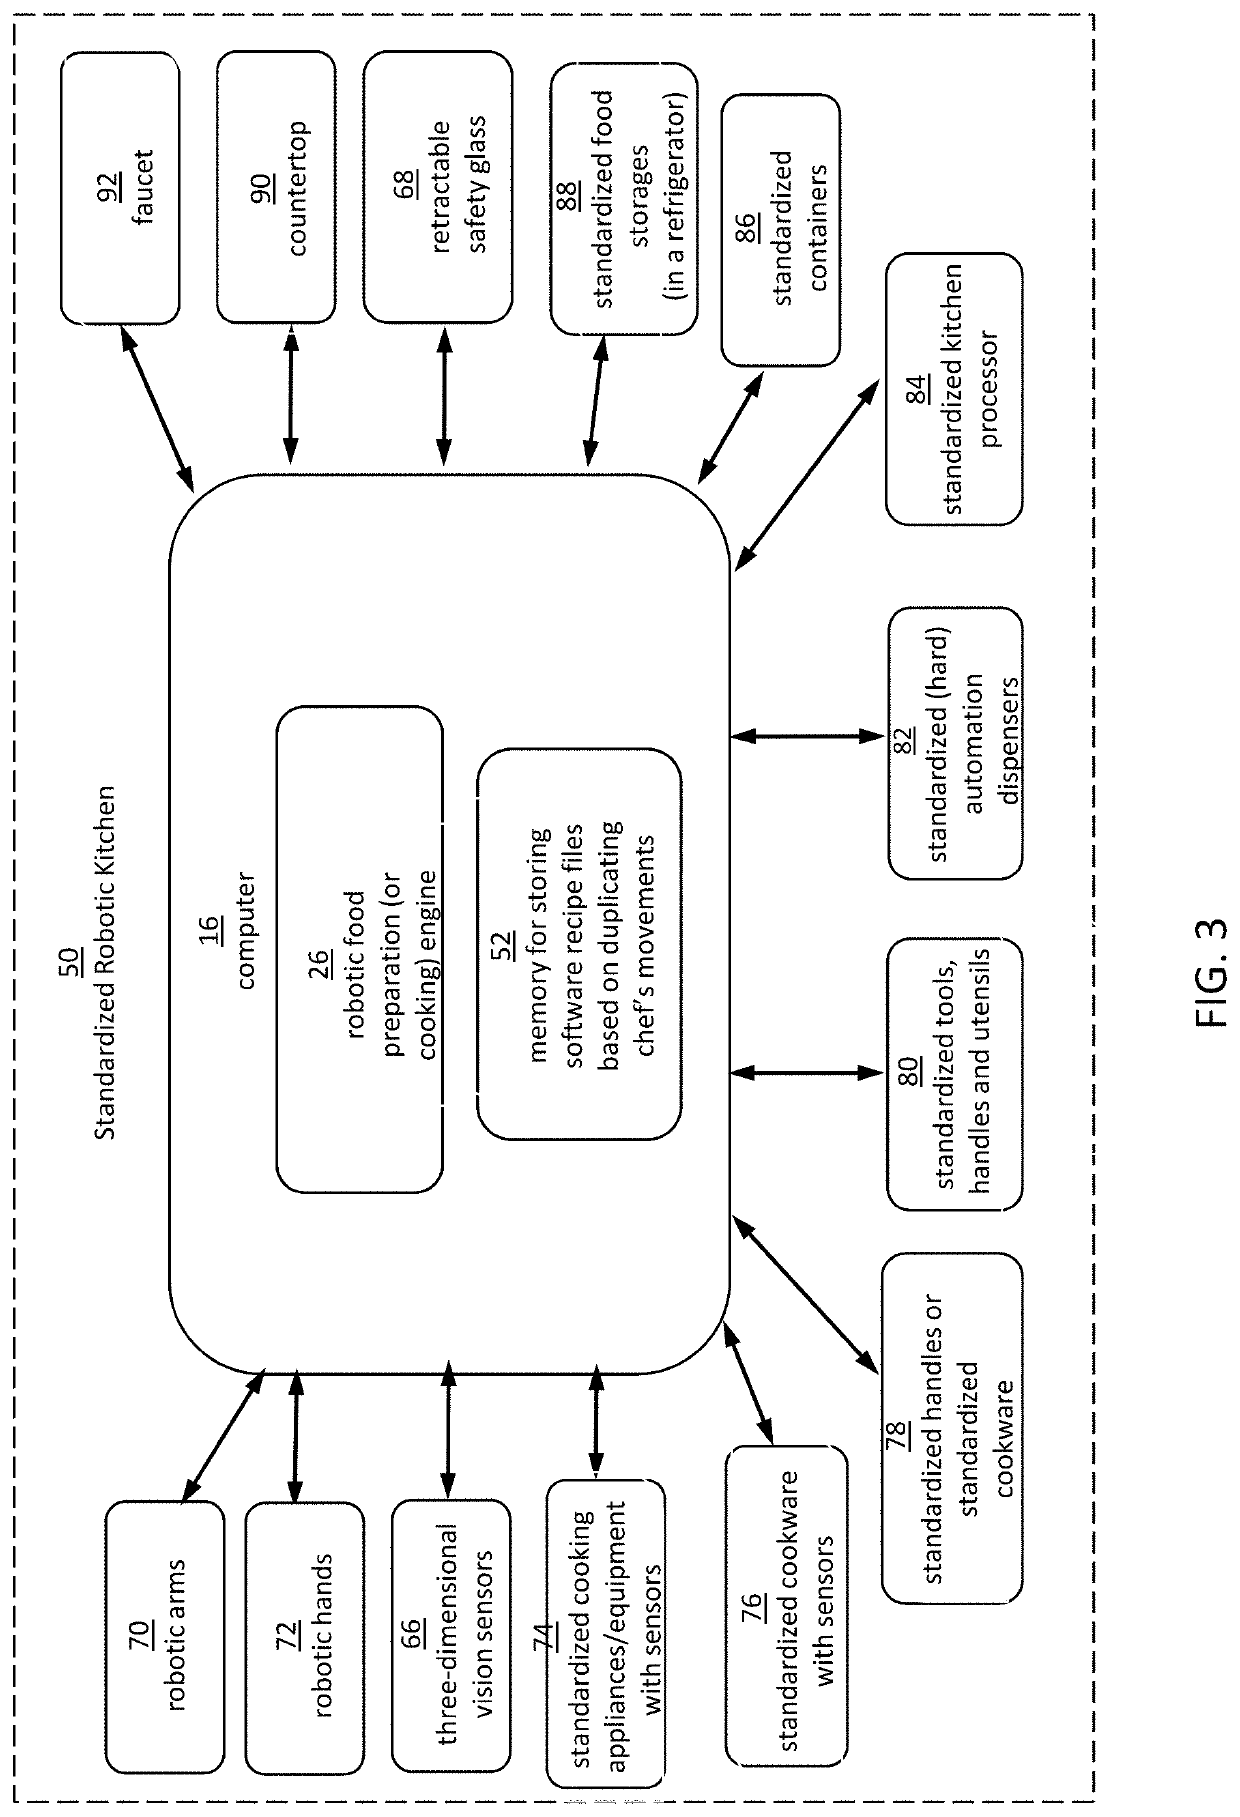 Robotic manipulation methods and systems for executing a domain-specific application in an instrumented enviornment with electronic minimanipulation libraries